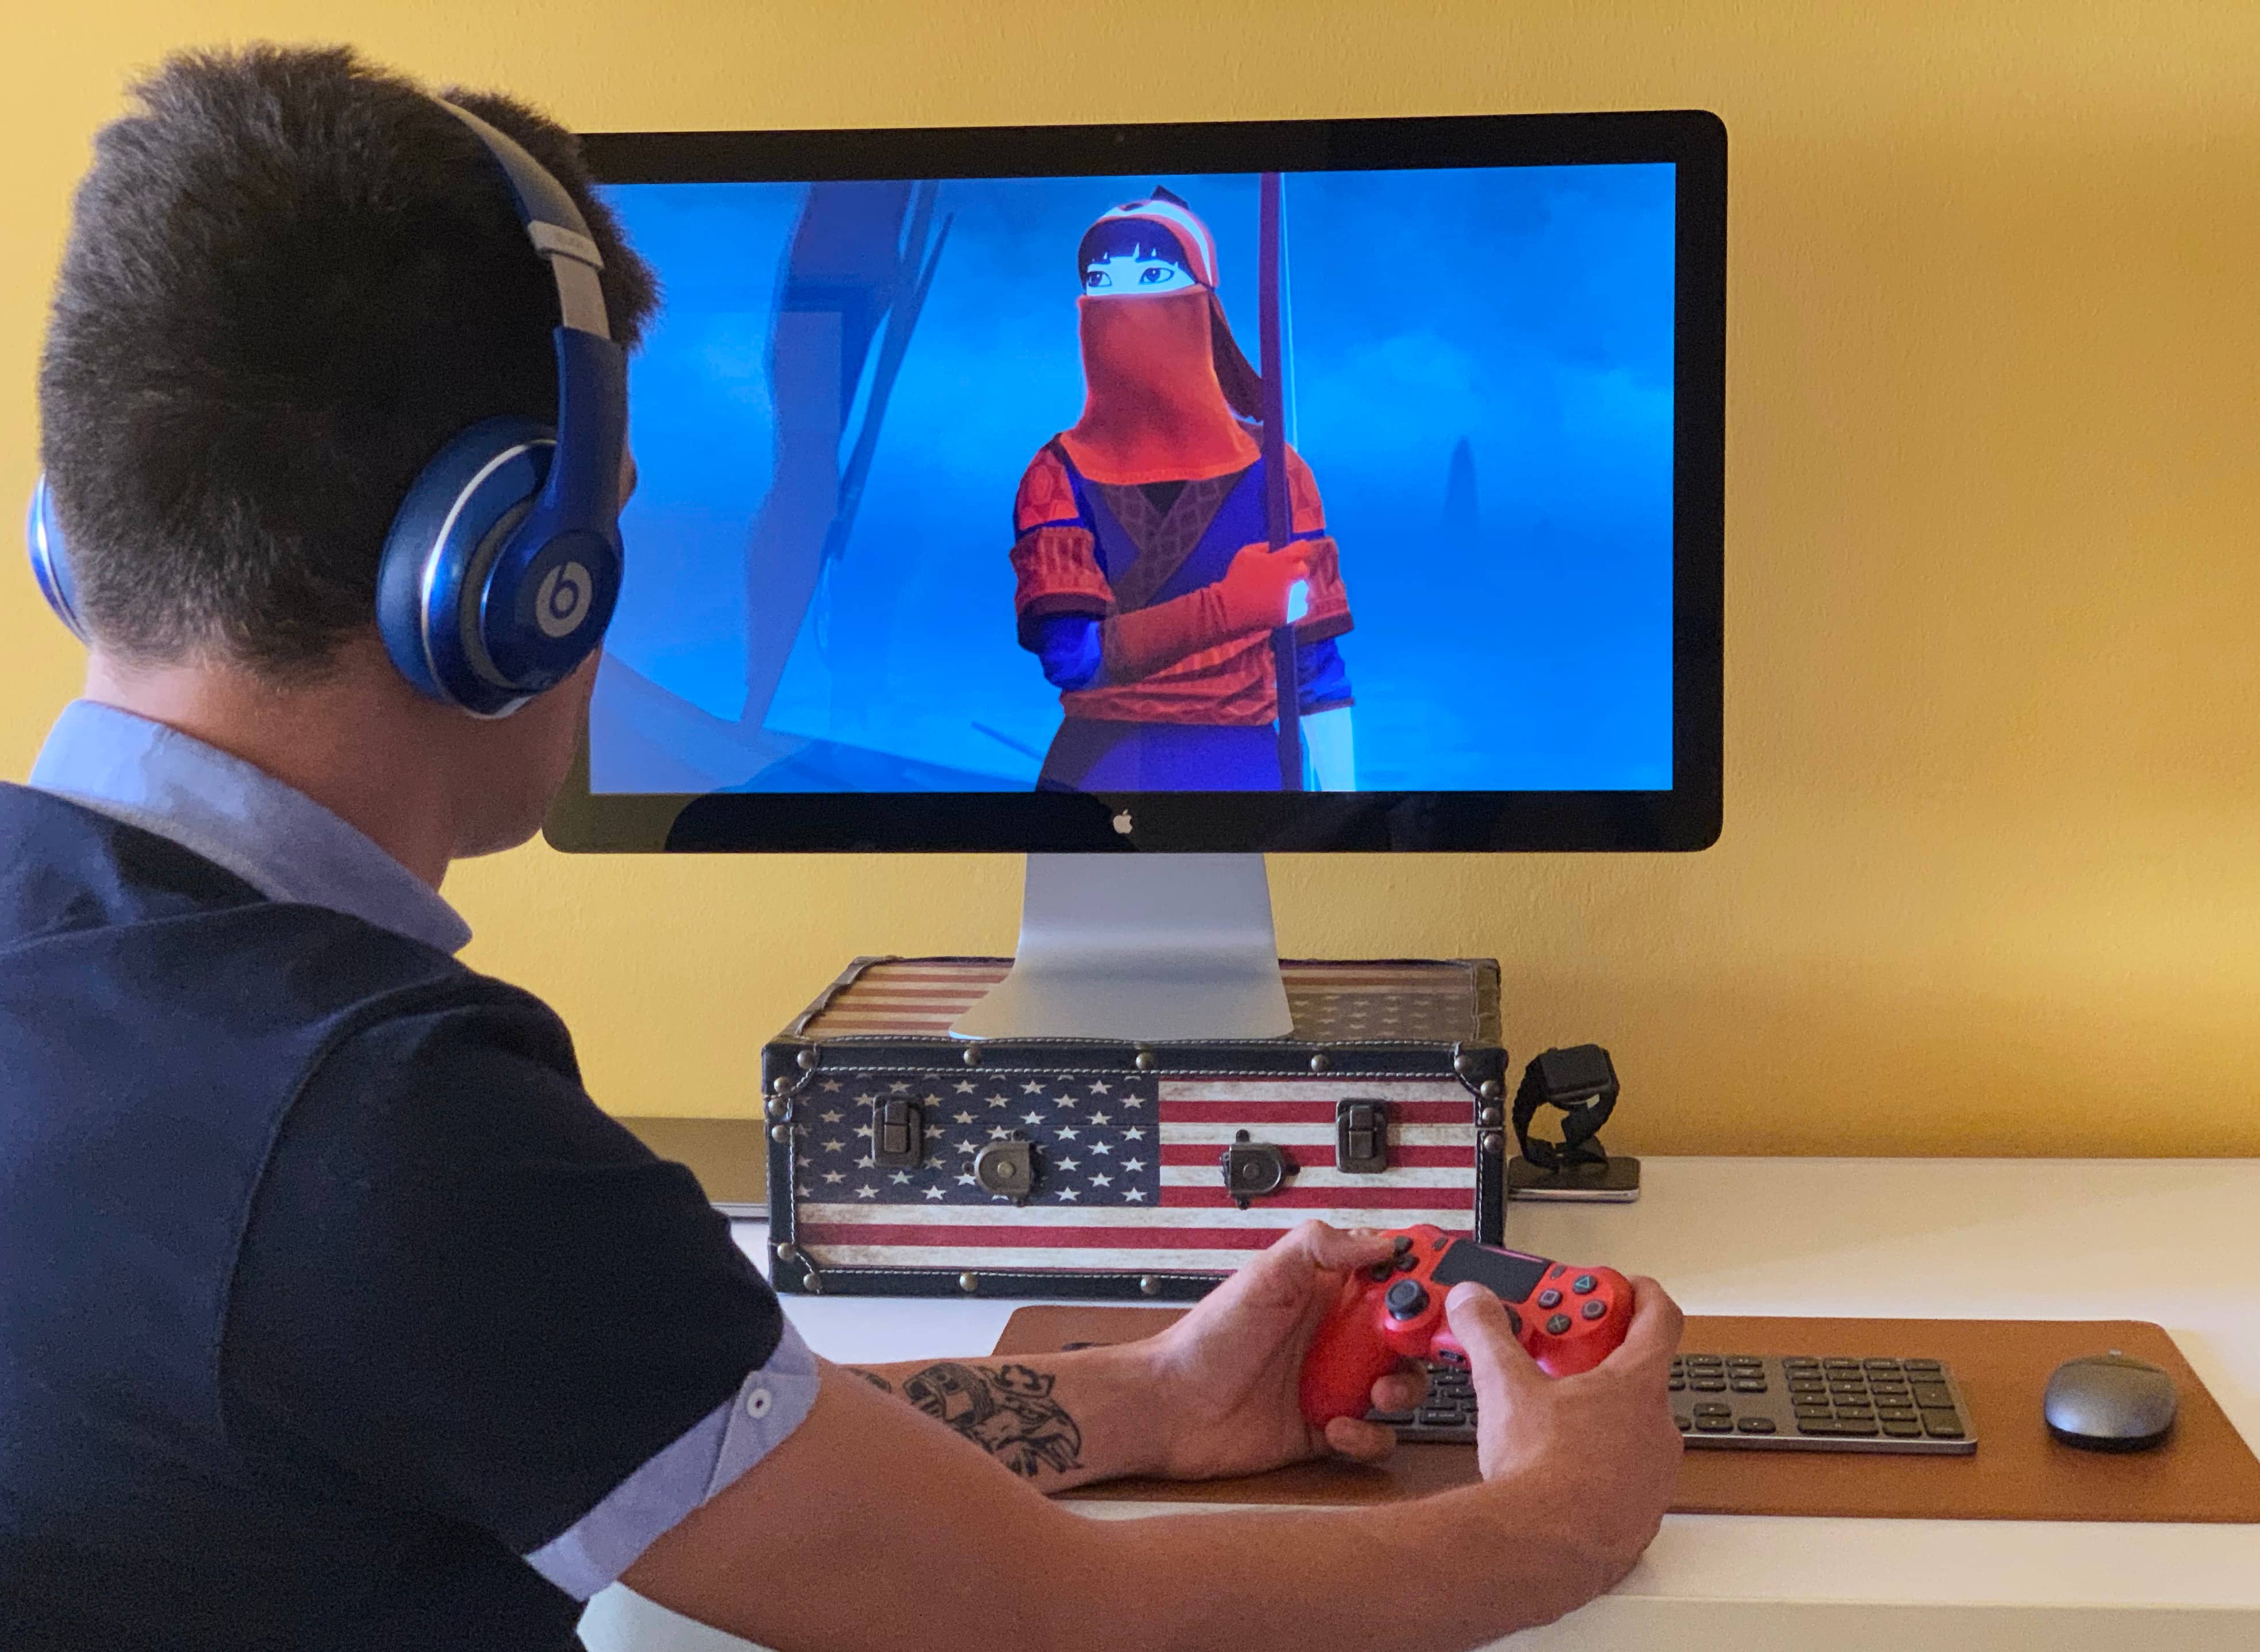 A photograph showing a young male sitting at their desk, holding a red PlayStation DualShock controller in their hand and playing an Apple Arcade game on their Apple Thunderbolt Display